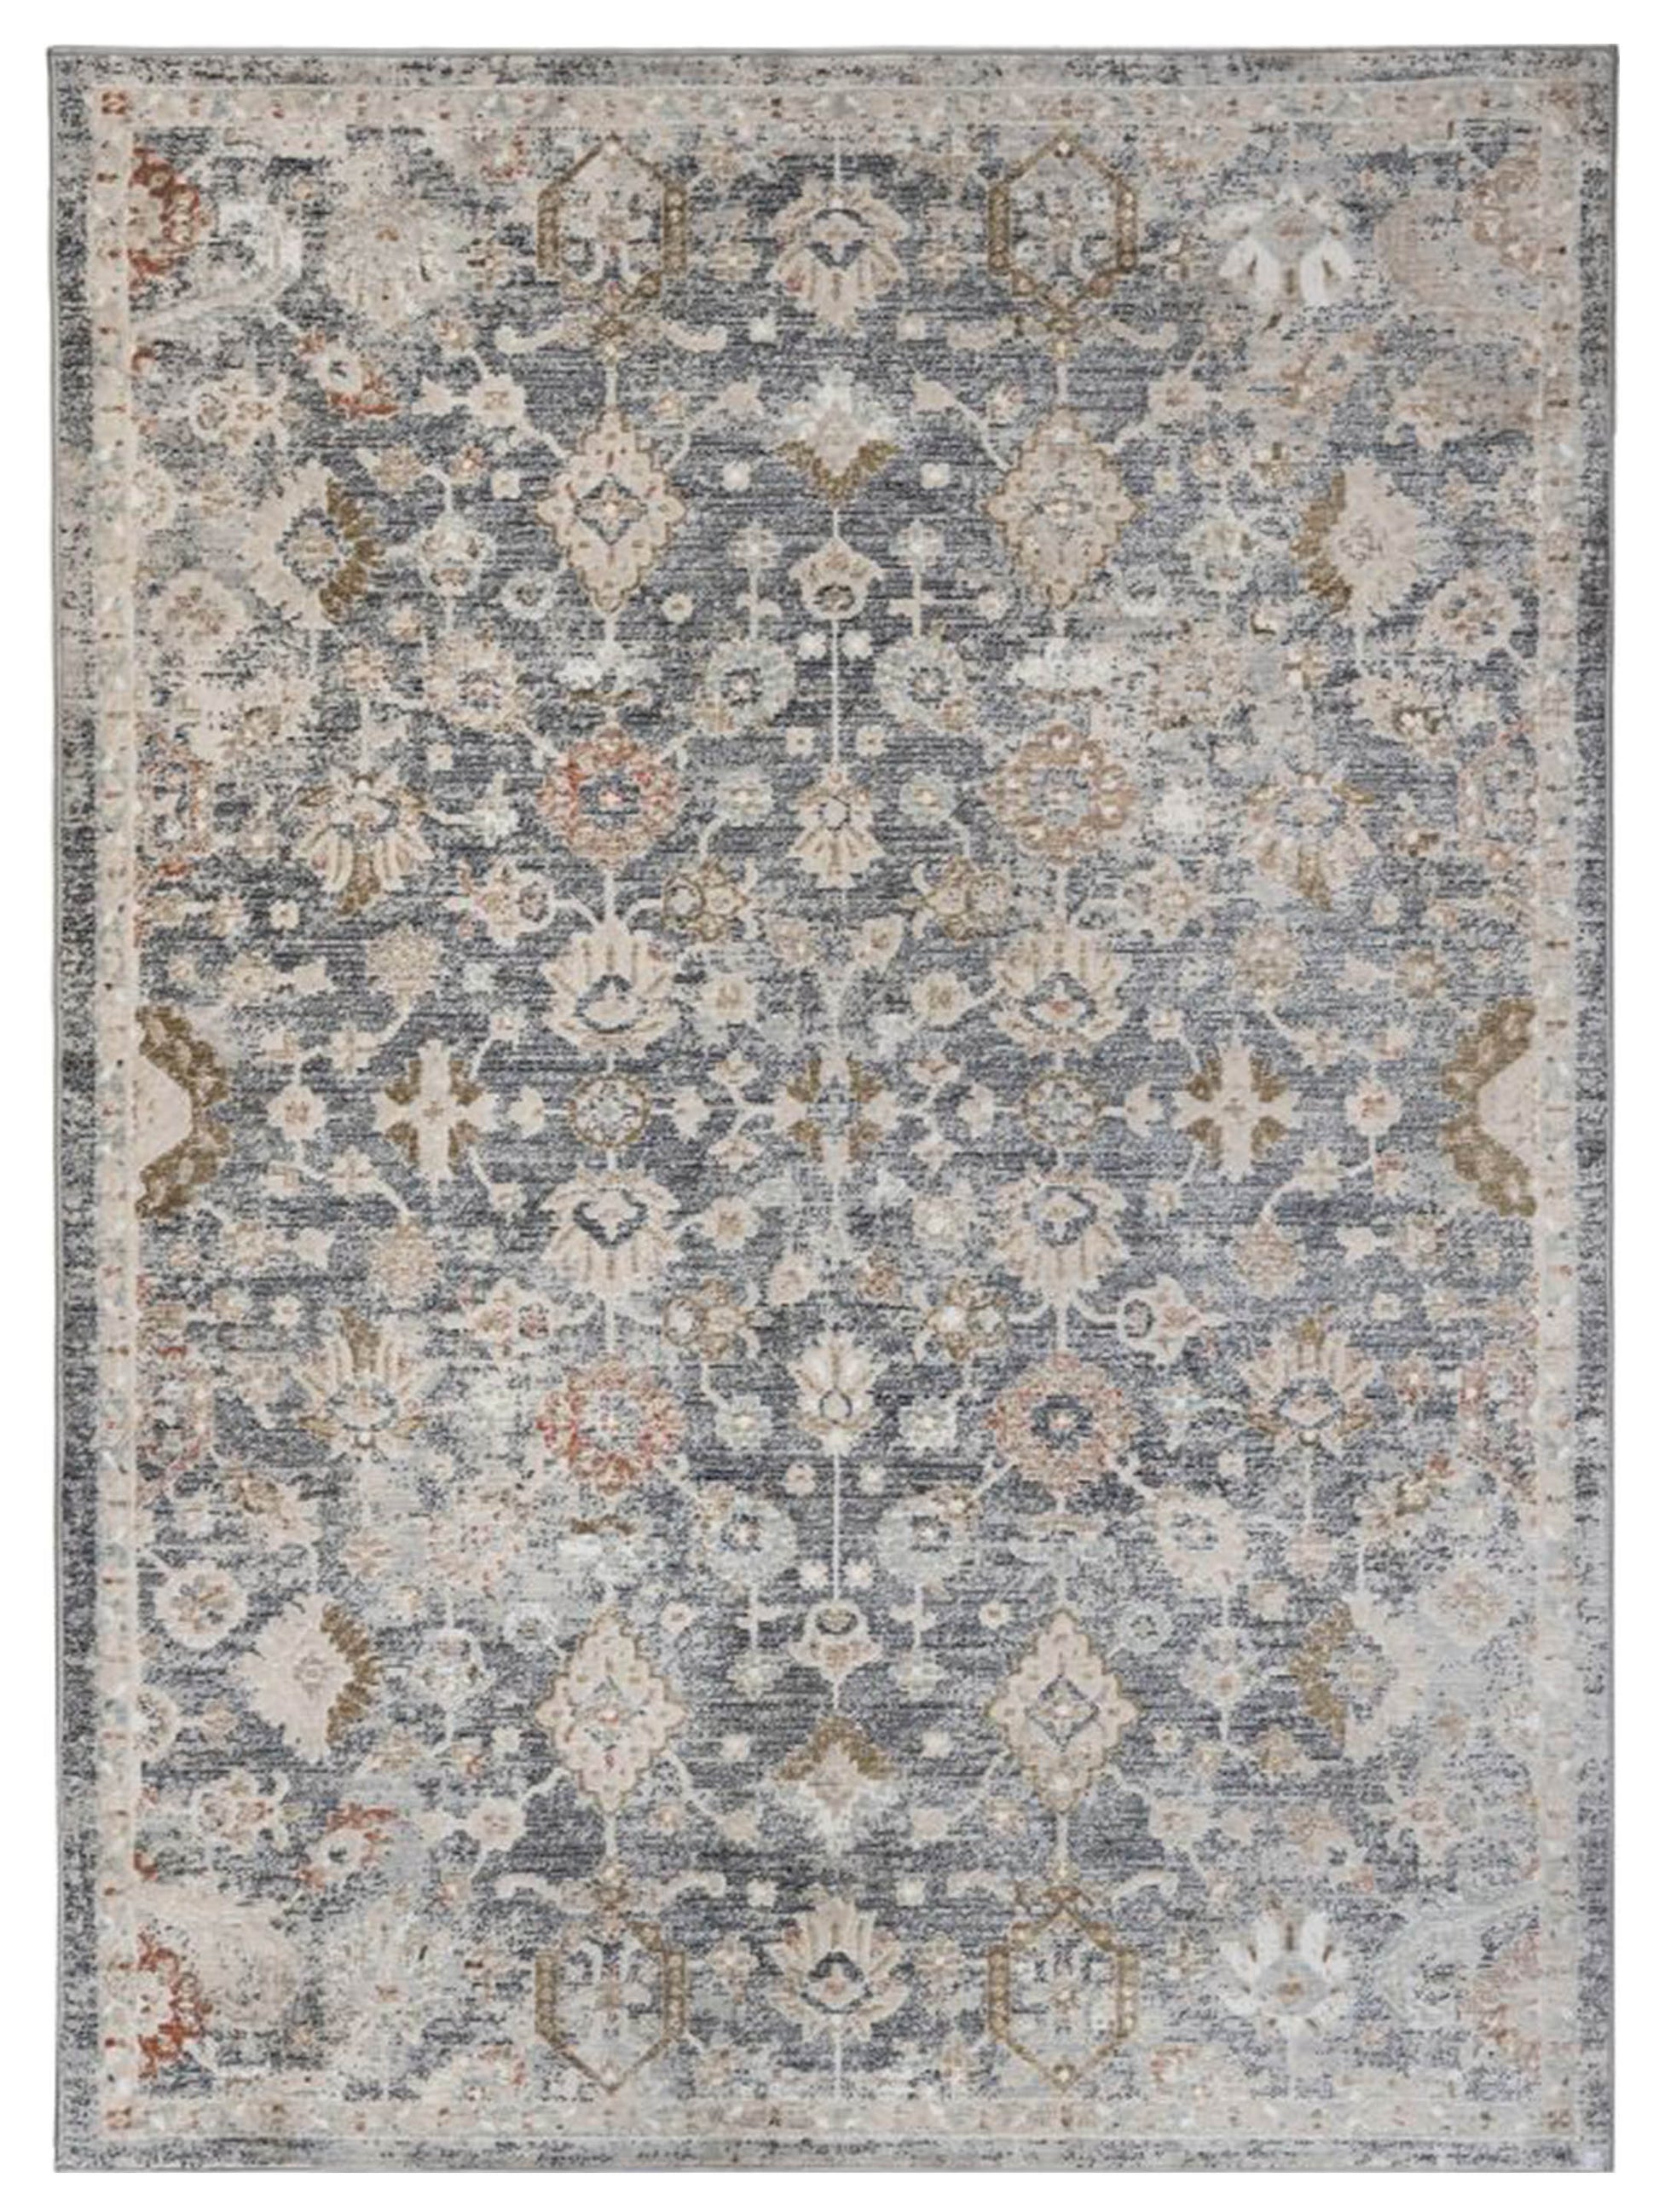 Limited Portia PE-159 Dk.Grey Transitional Machinemade Rug